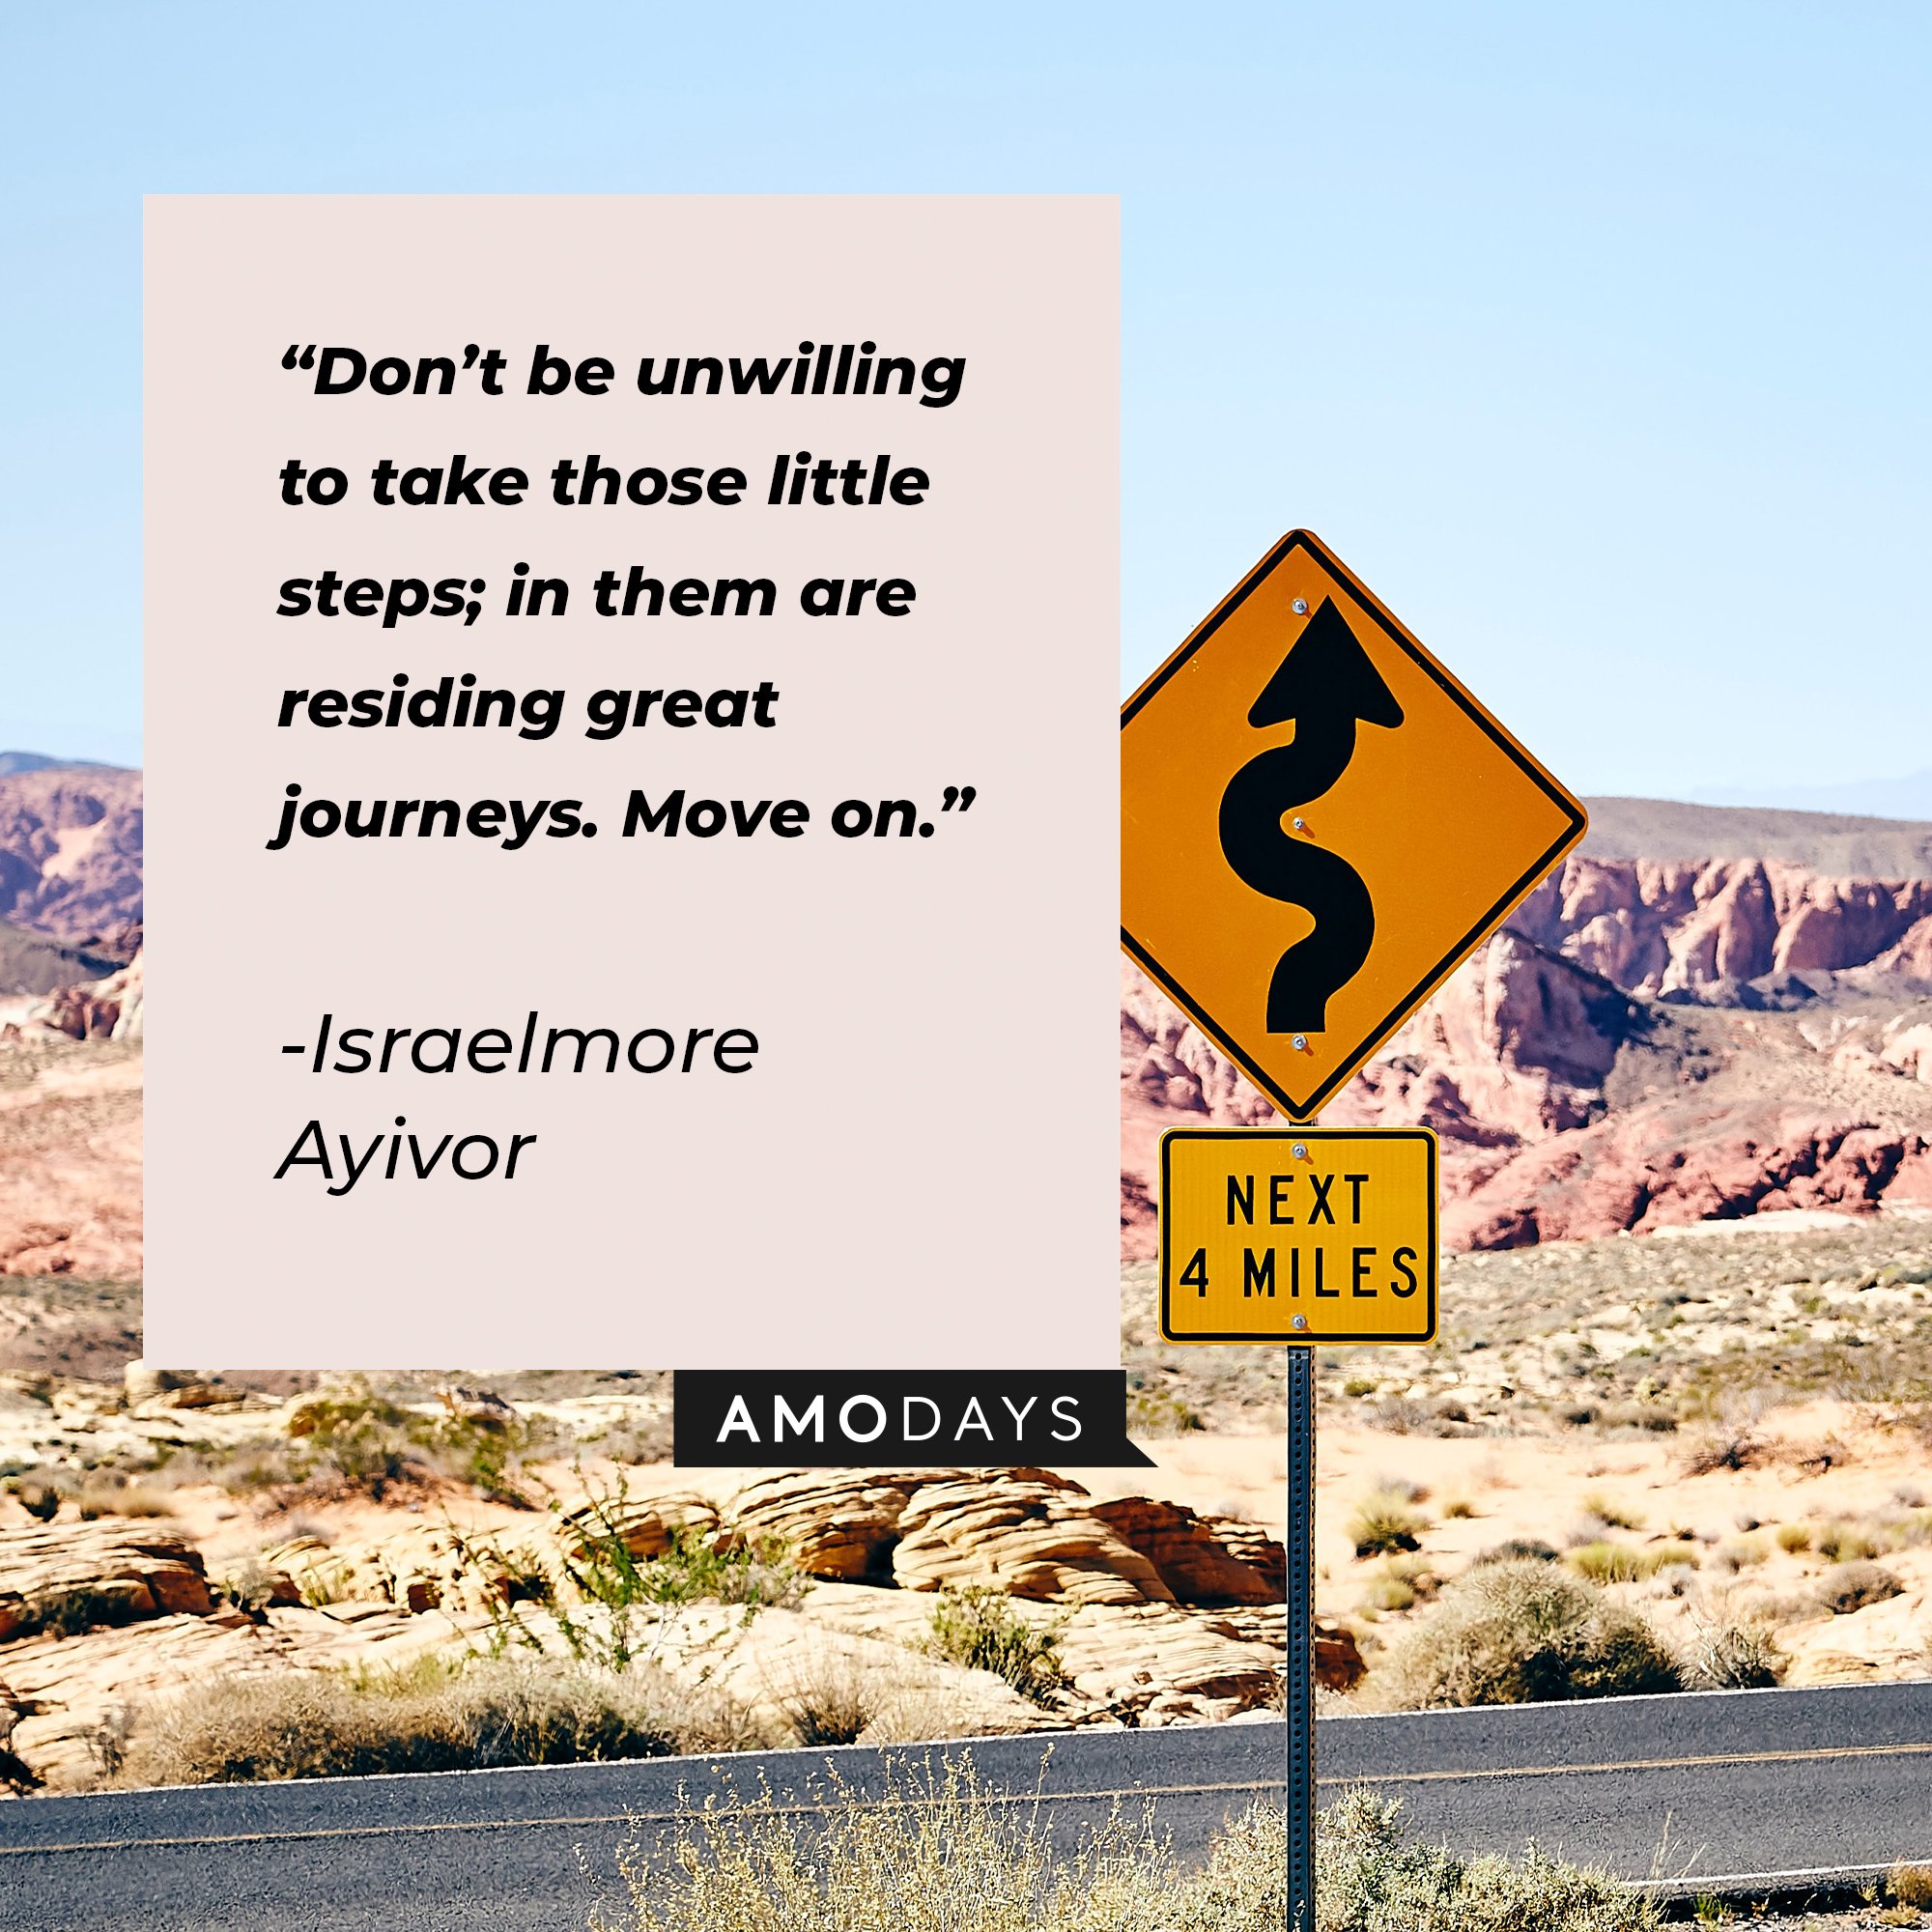 Israelmore Ayivor's quote: "Don't be unwilling to take those little steps; in them are residing great journeys. Move on." | Image: AmoDays